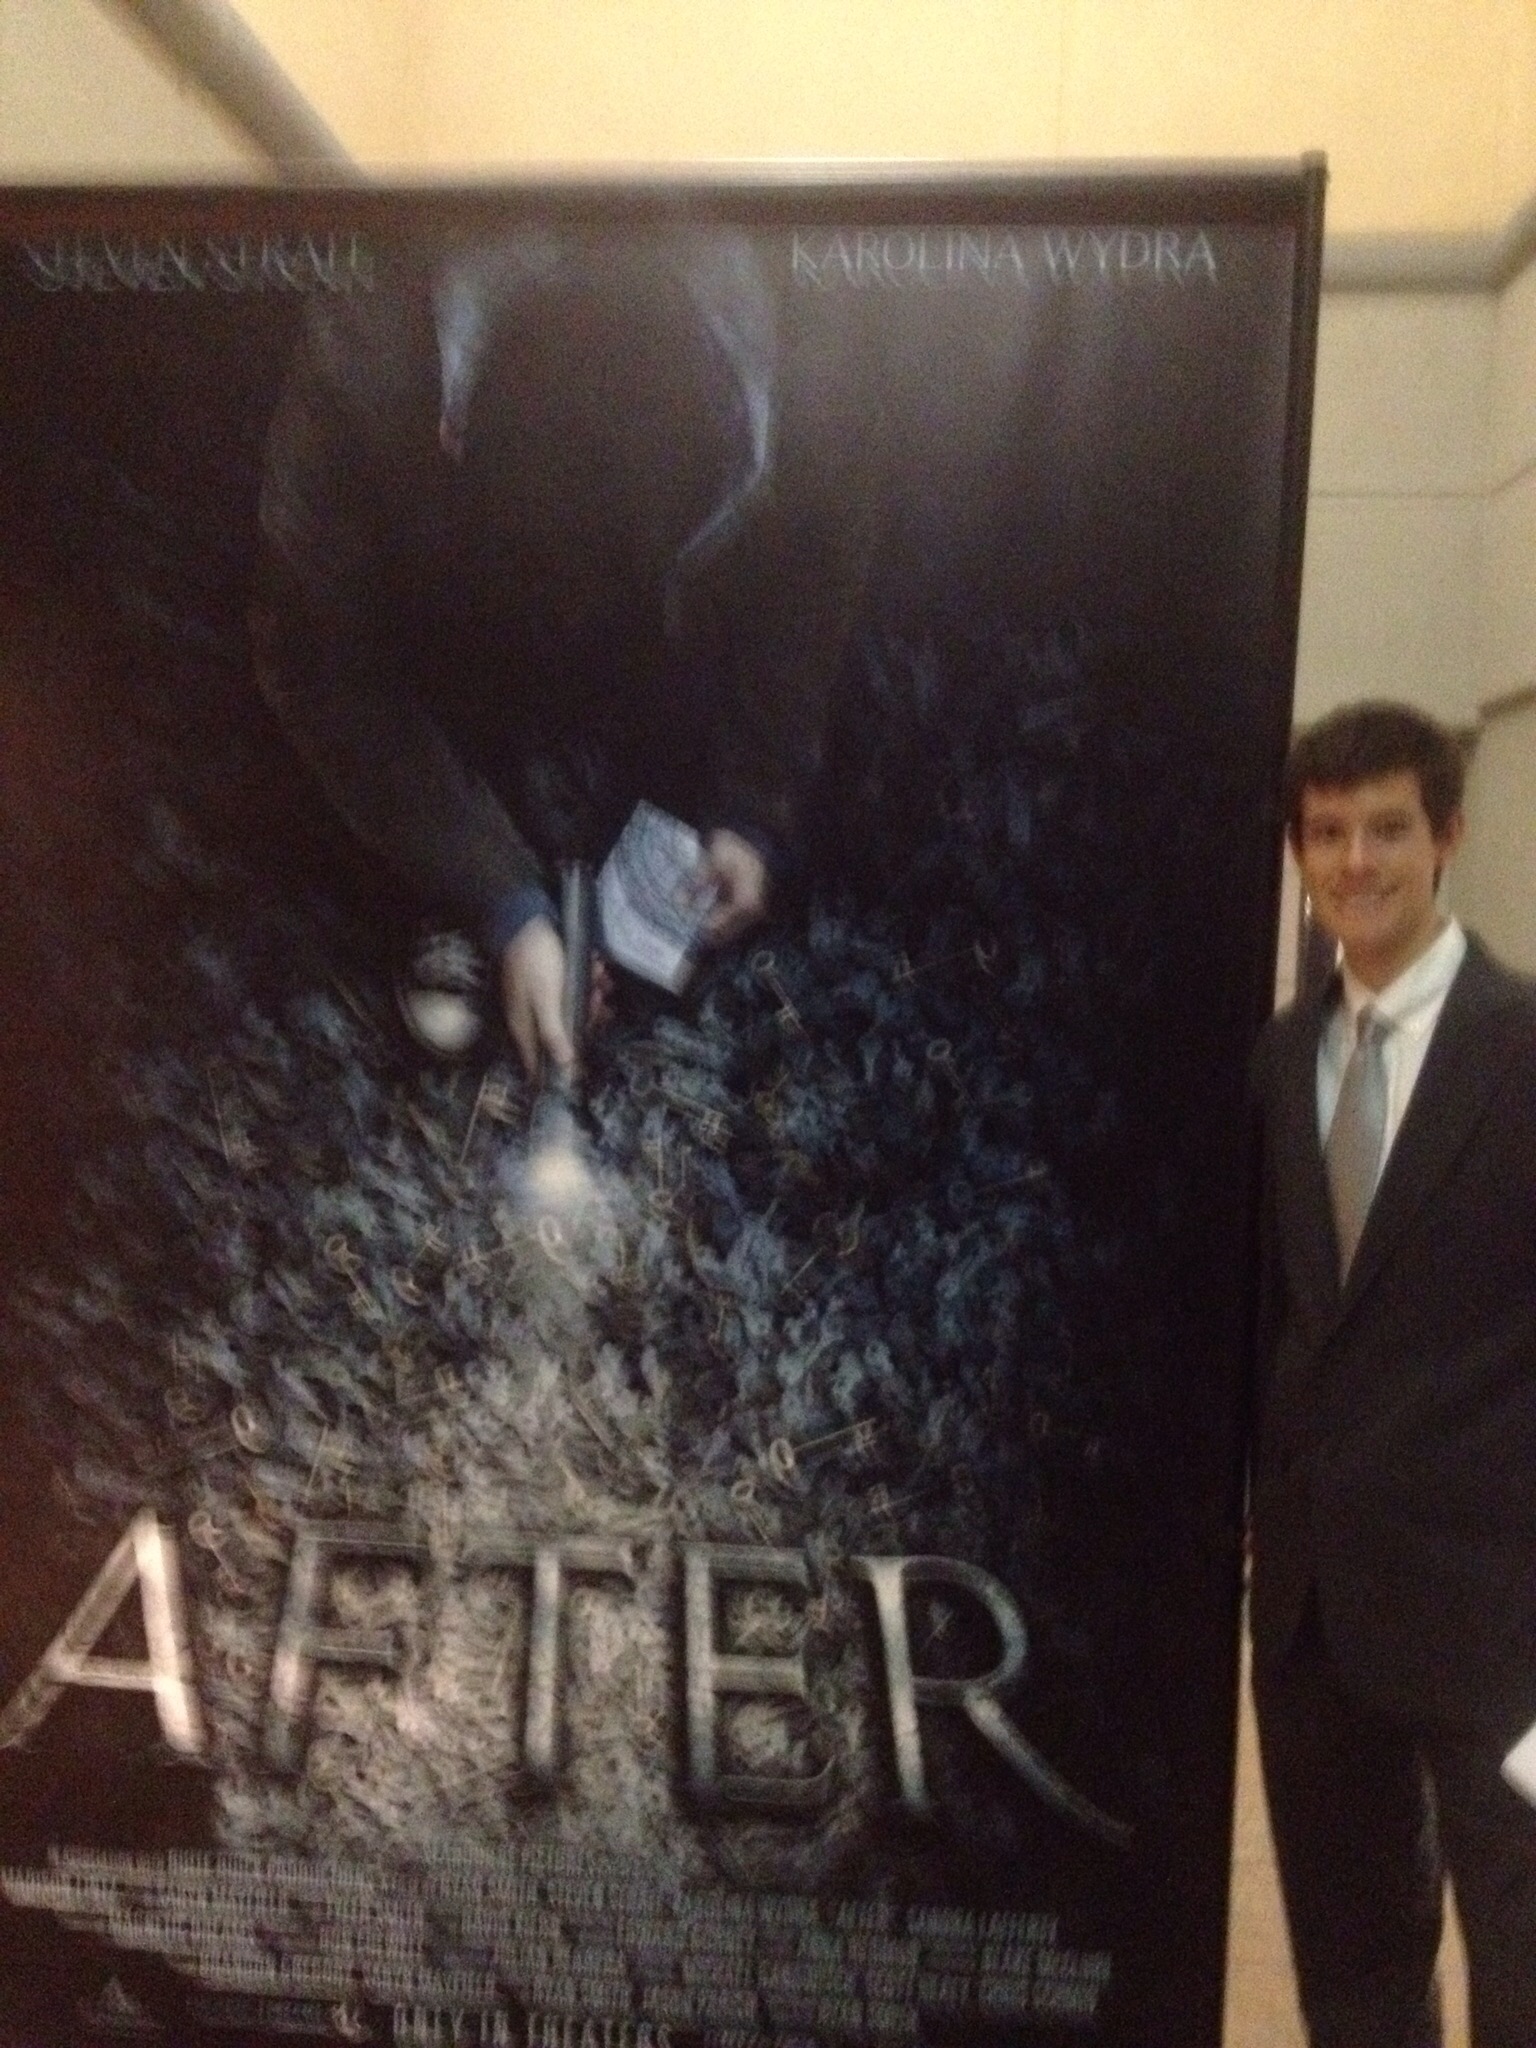 This is at the Premier for After which I was a Production Assistant on!